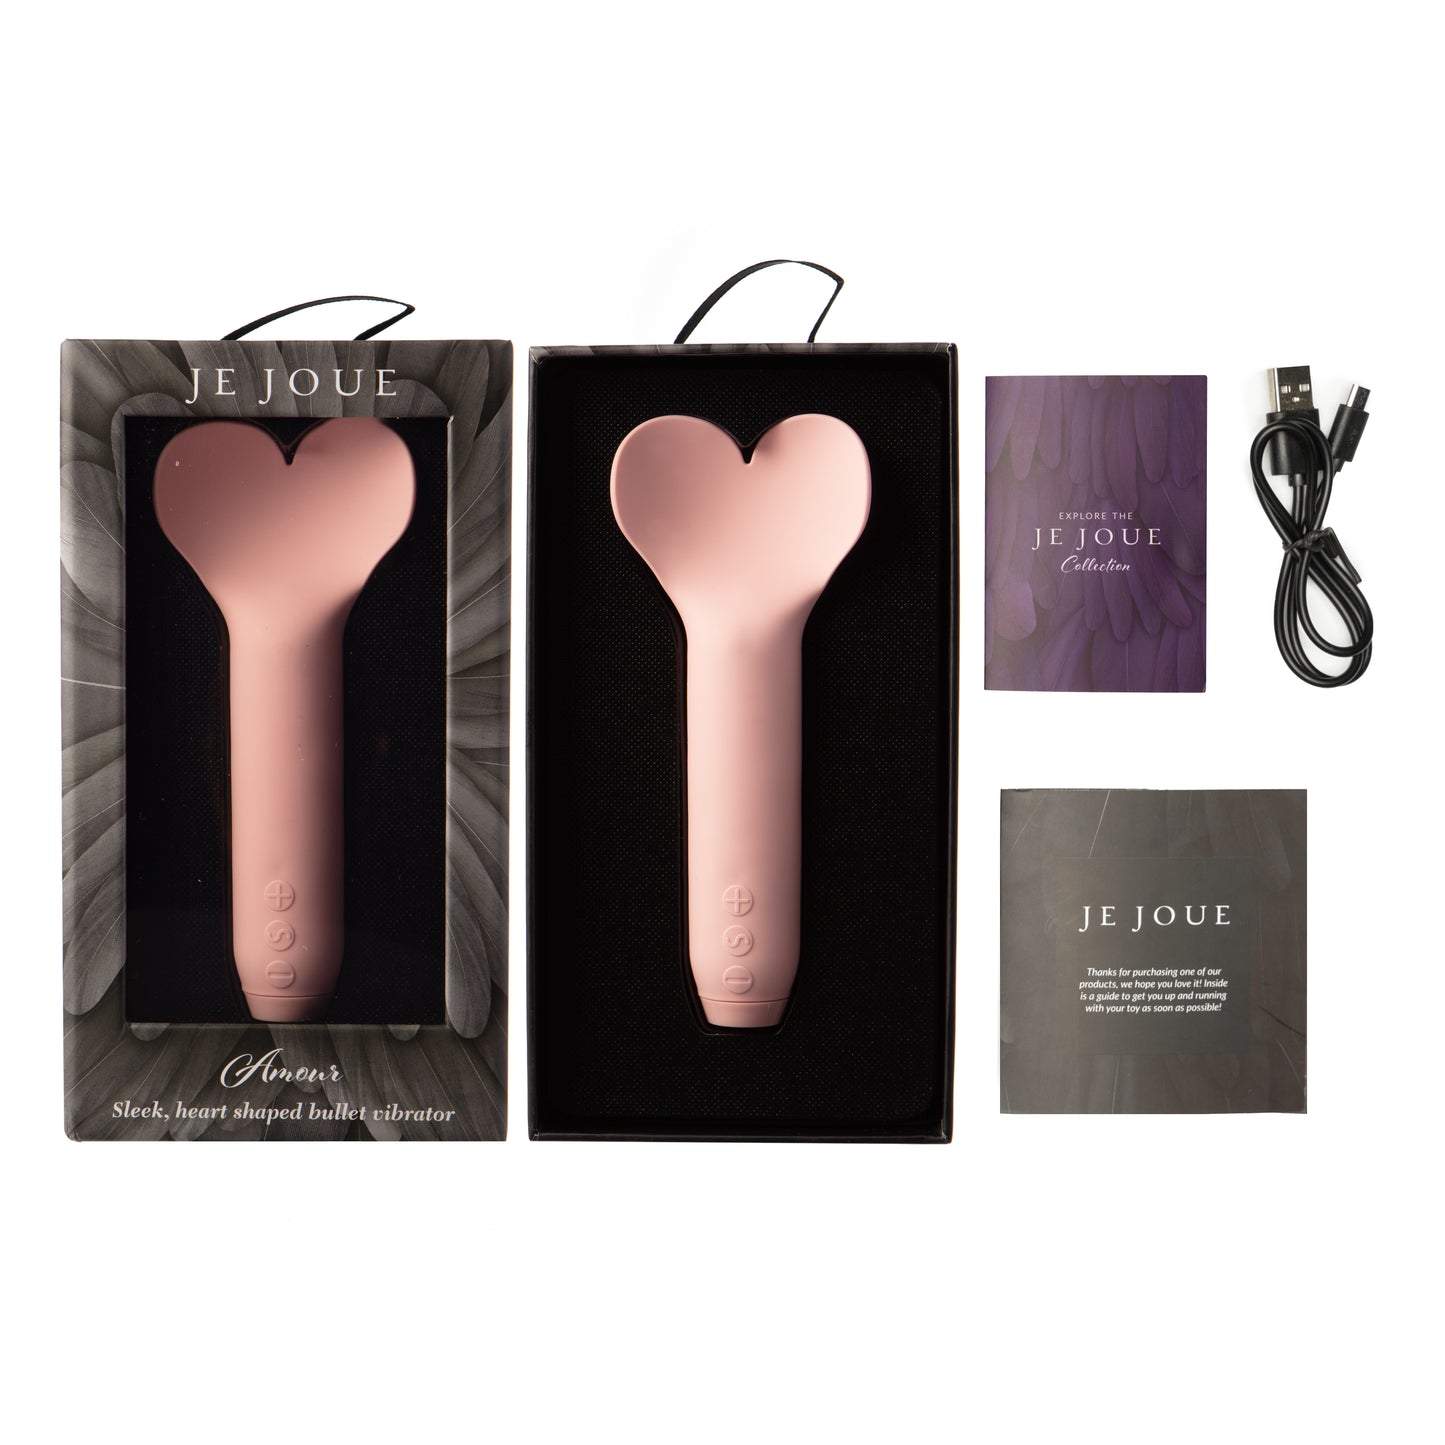 Amour Bullet vibrator in box with accessories on side